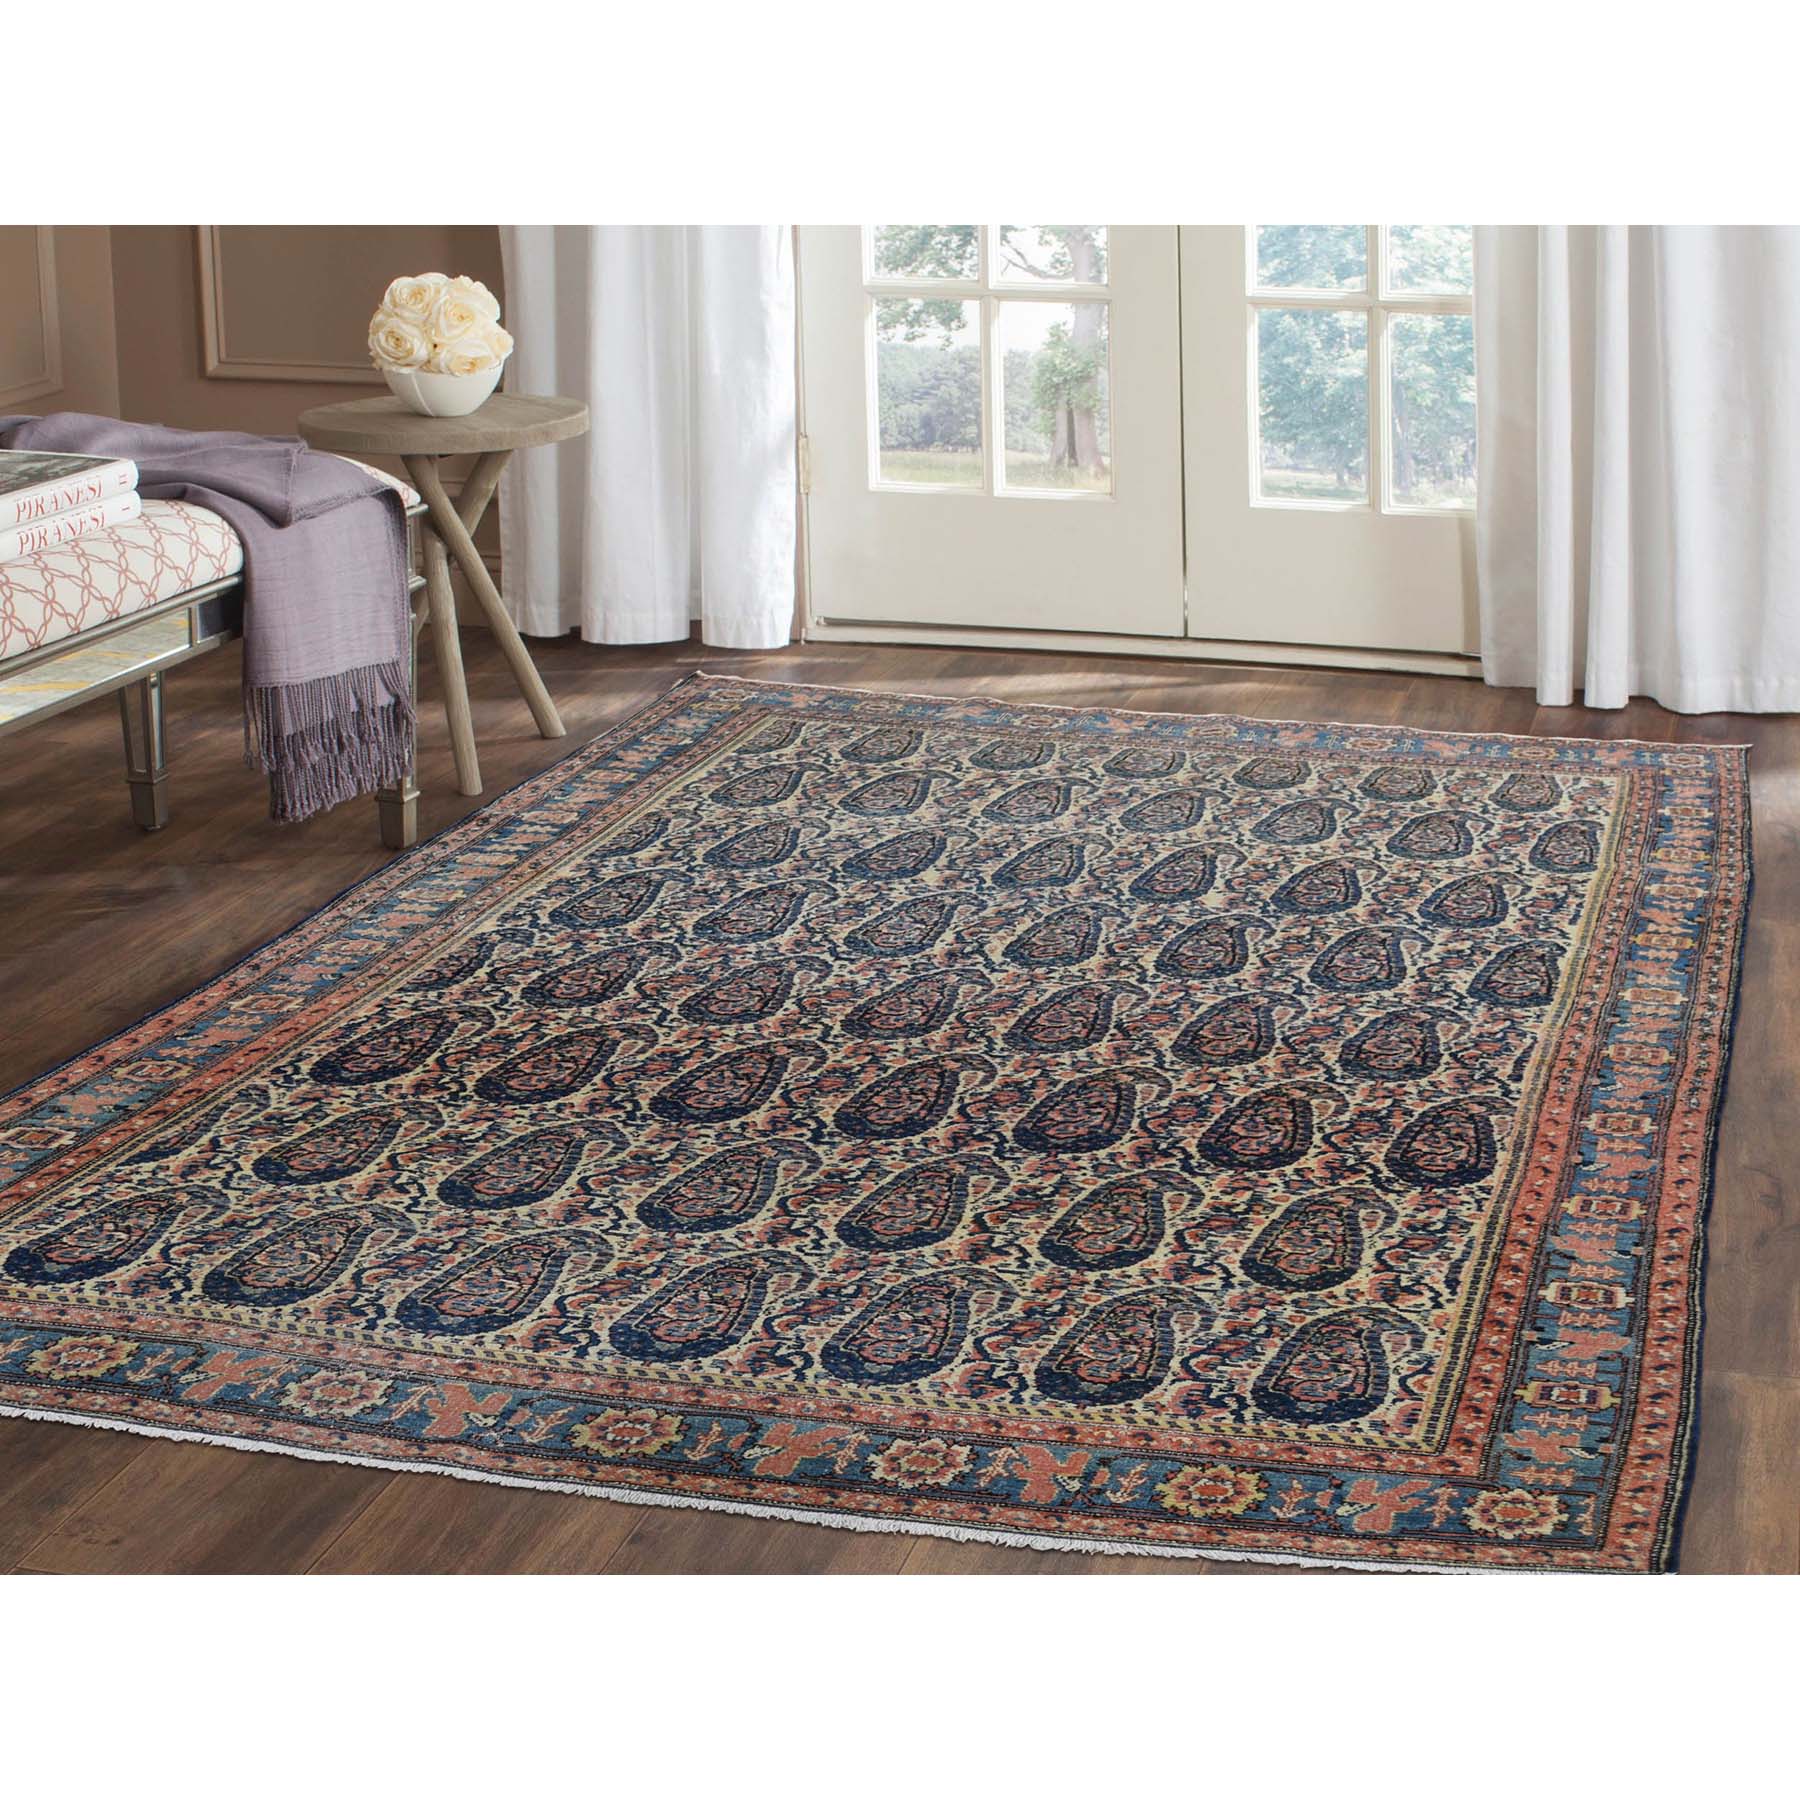 4-4 x6-4  Antique Persian Senneh paisley Design Exc Condition Hand-Knotted Oriental Rug 